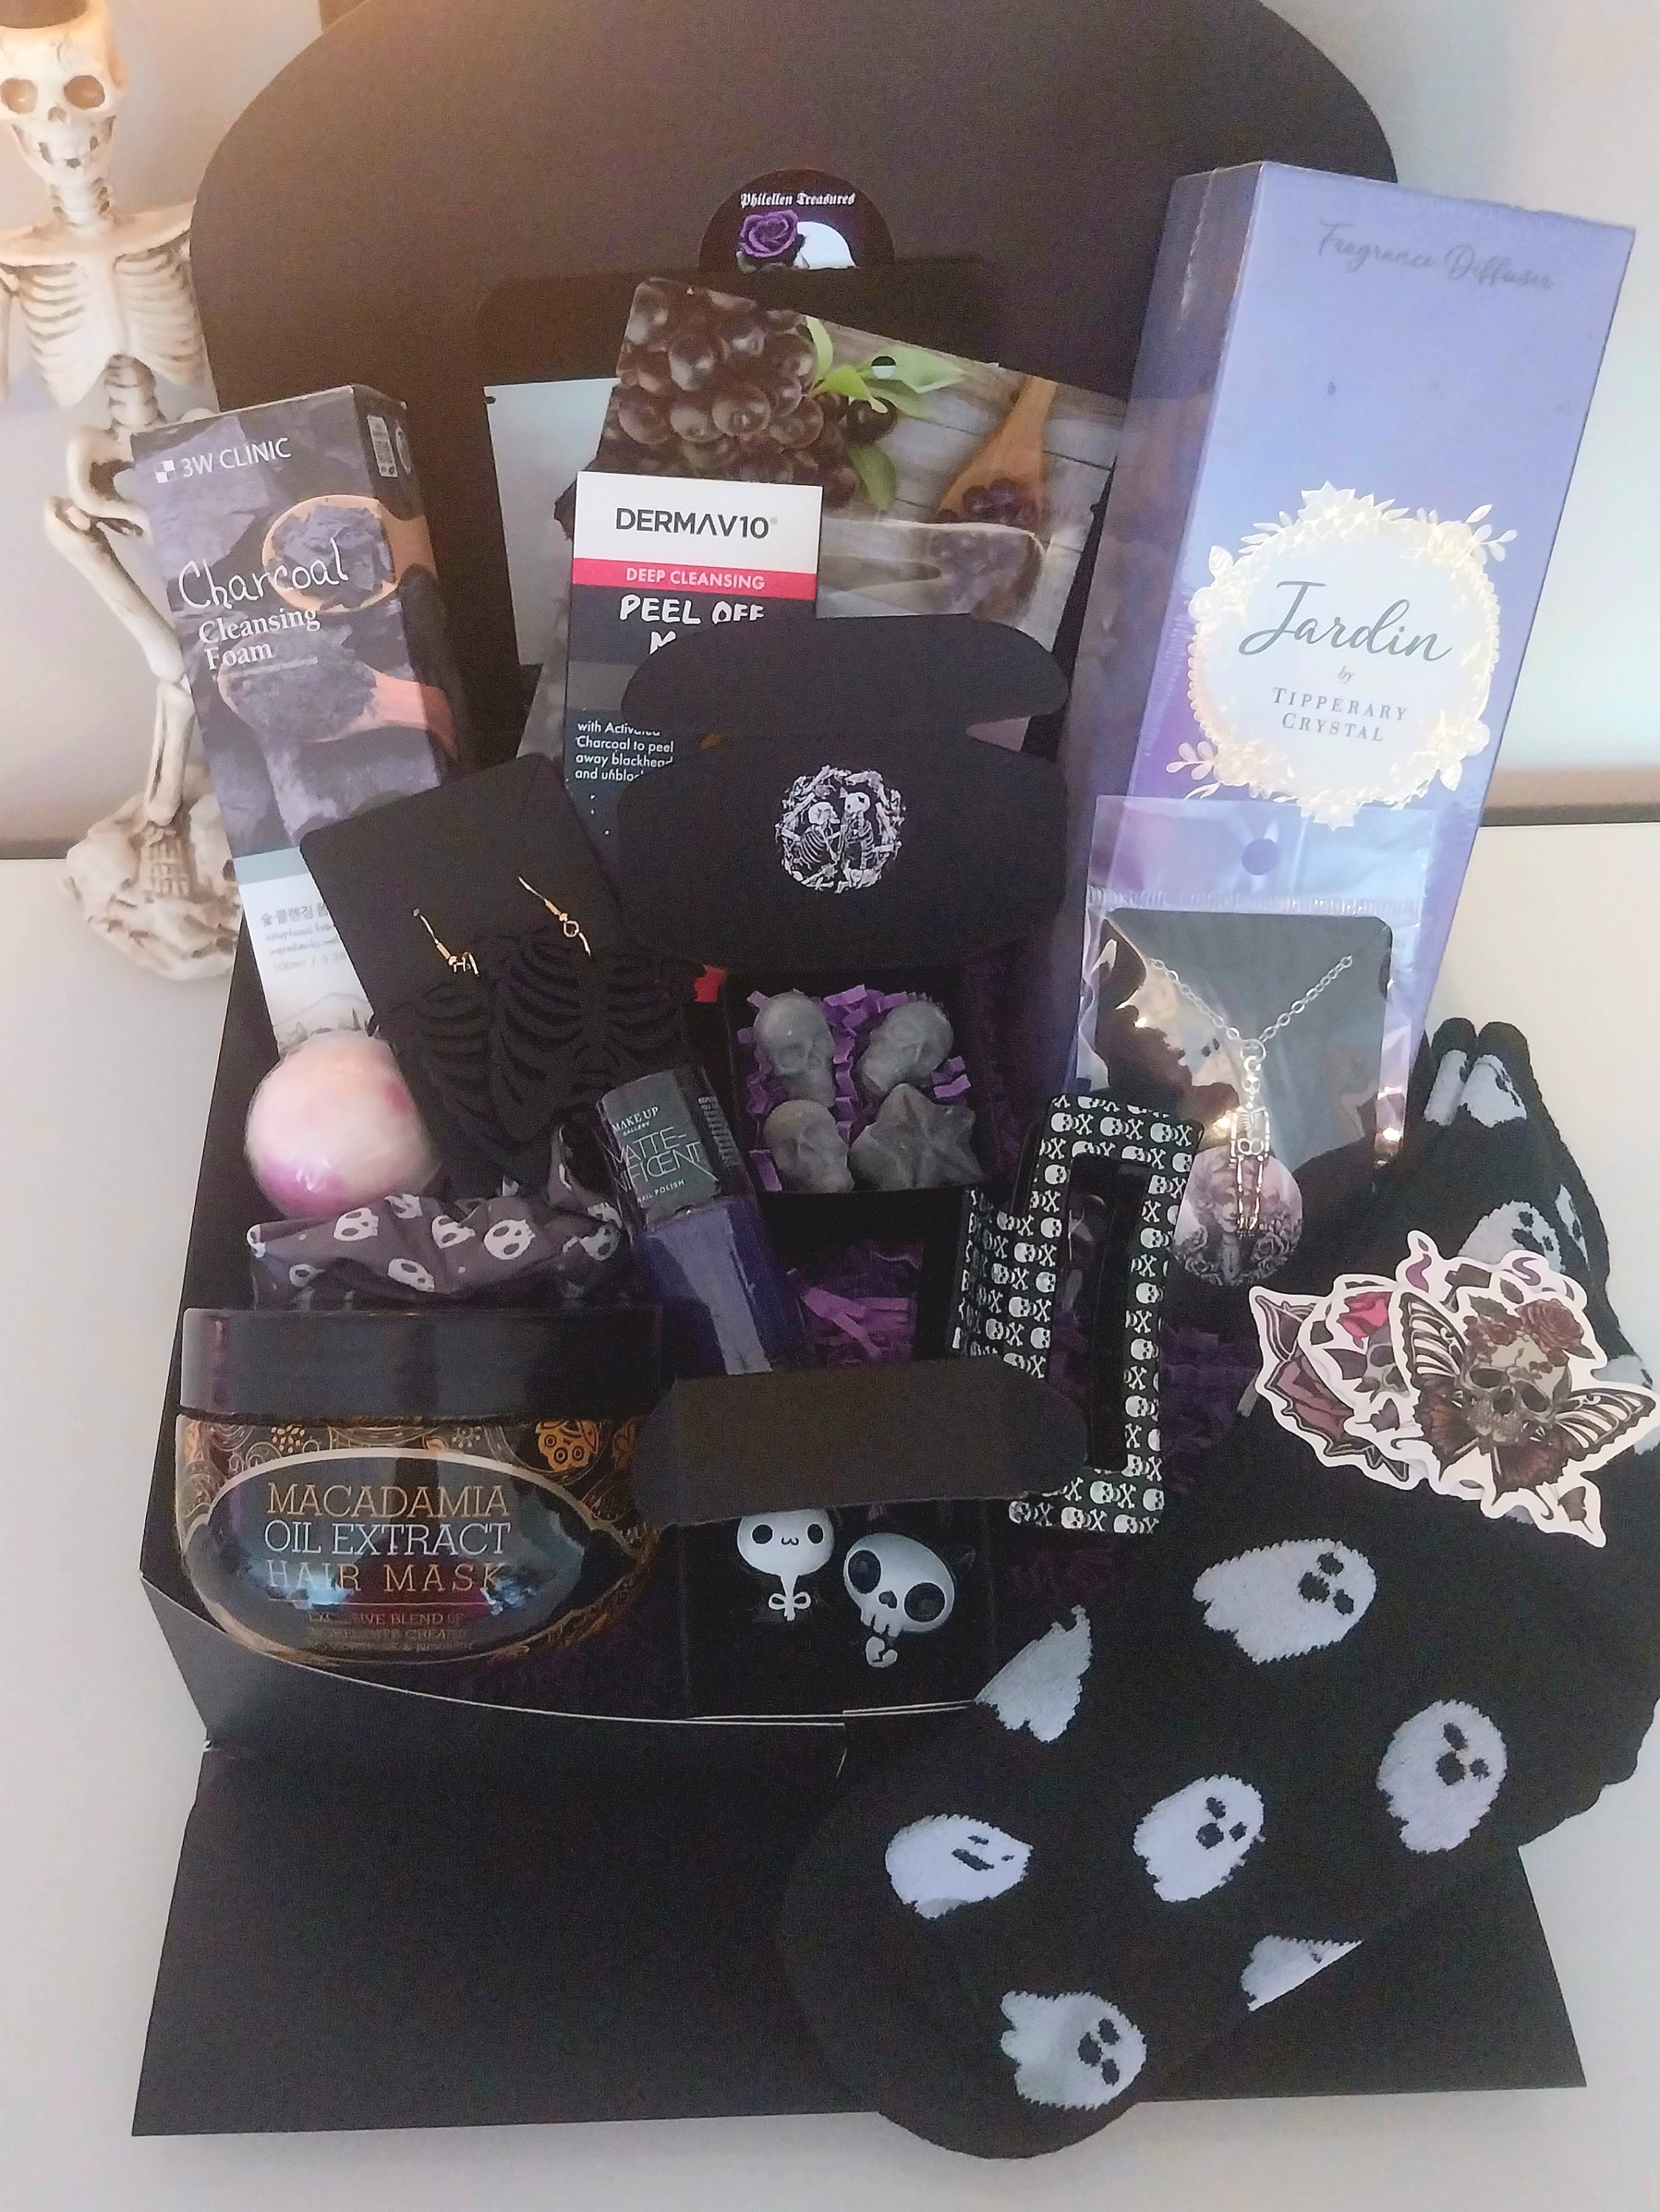 Goth Girl Gift Box, Witchy Woman Gifts, Halloween Mystery Box, Self Care  Gift Box, Wednesday Addams Care Package, Horror Lover Gifts for Her 